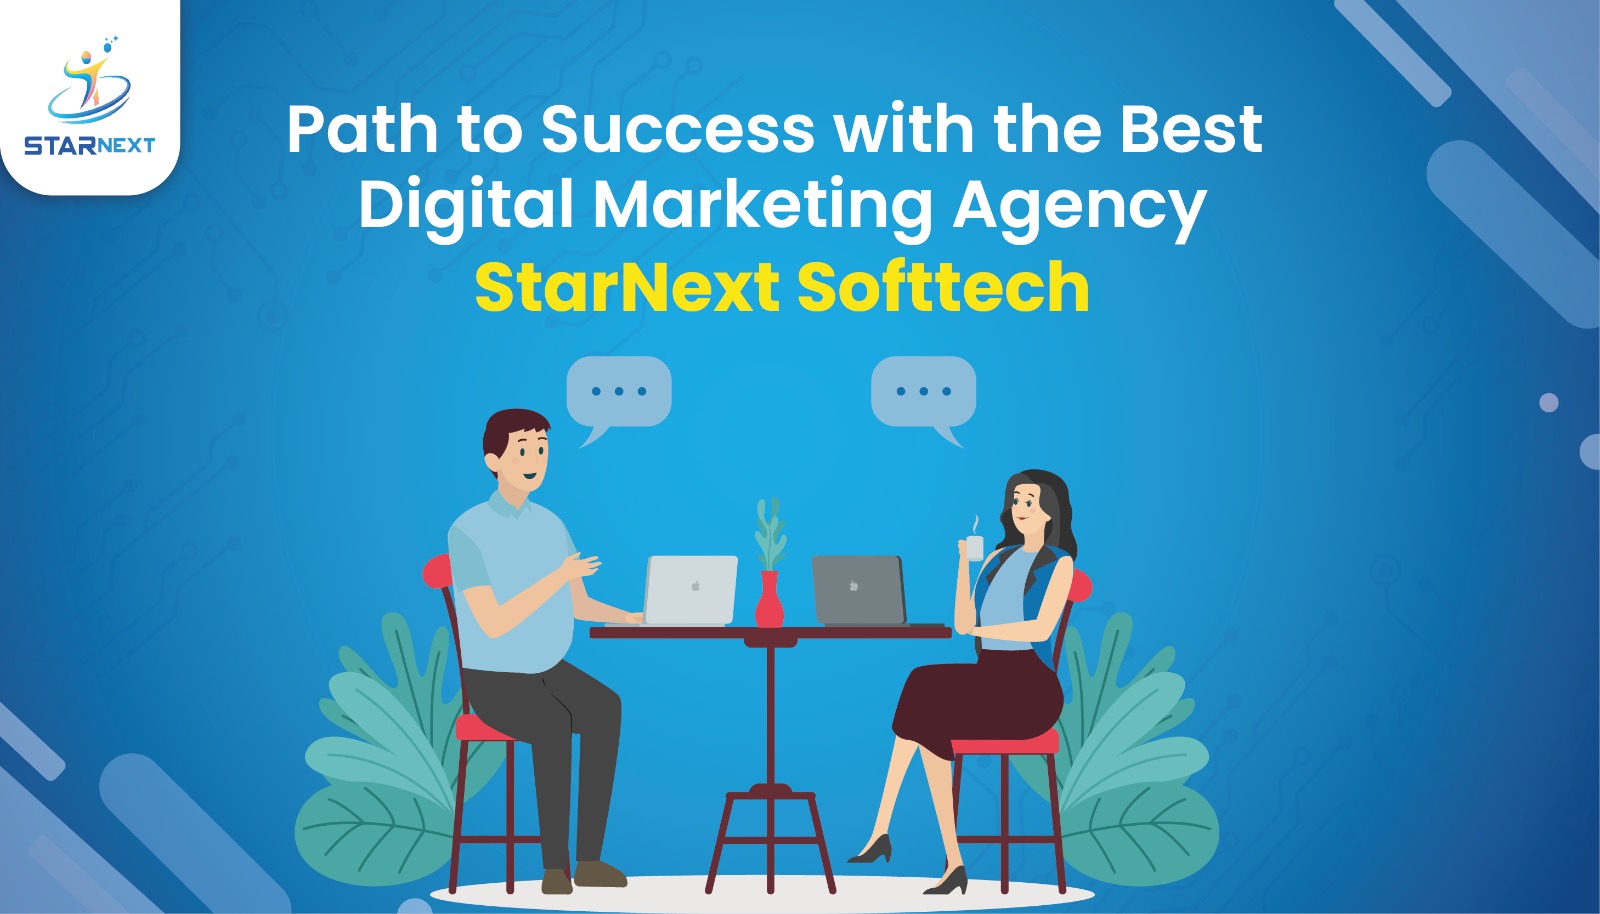 Path To Success With the Best Digital Marketing Agency